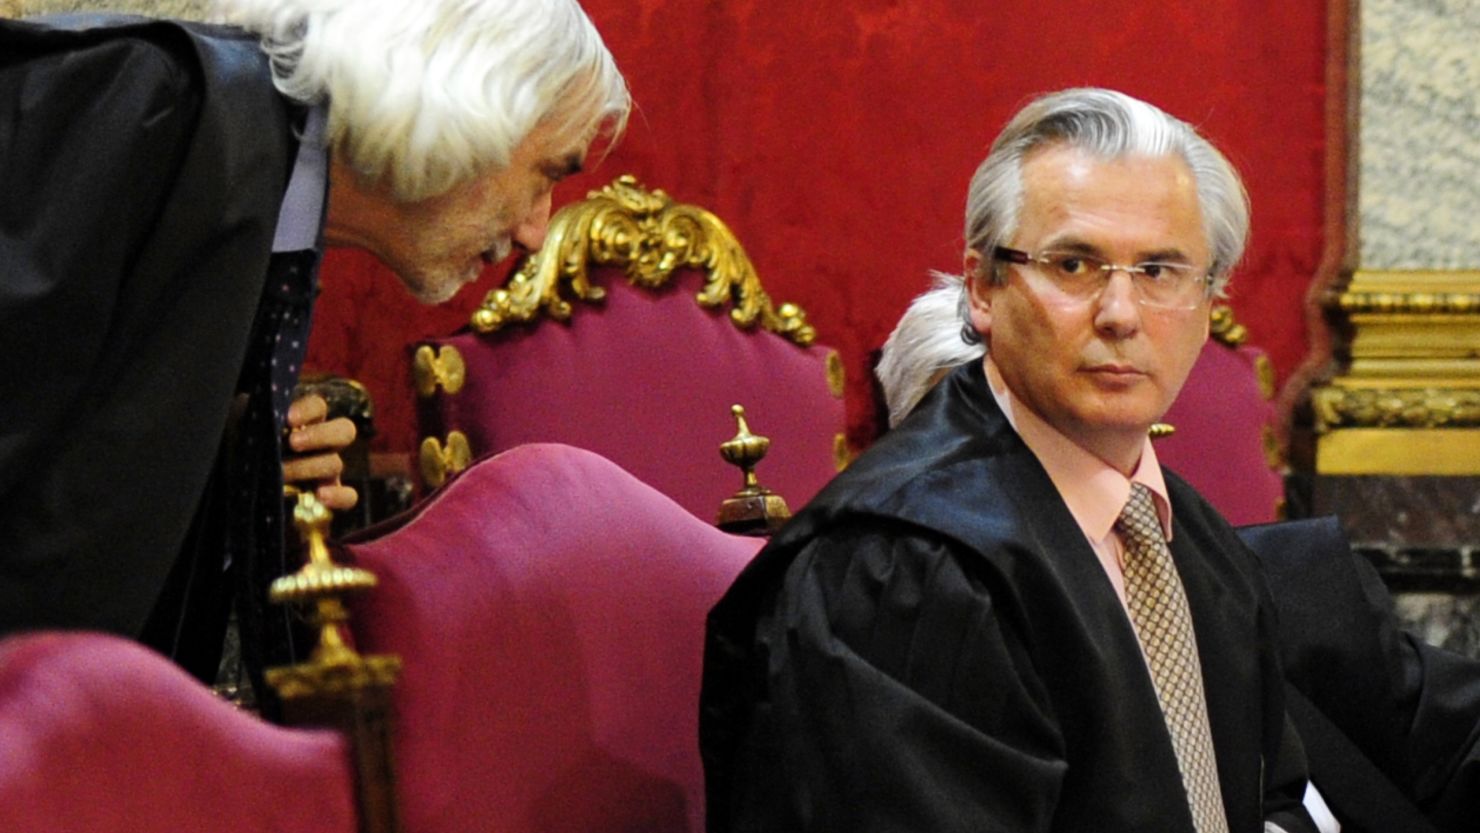 Spanish judge Baltasar Garzon (right) attends the first day of his trial on January 17, 2012.